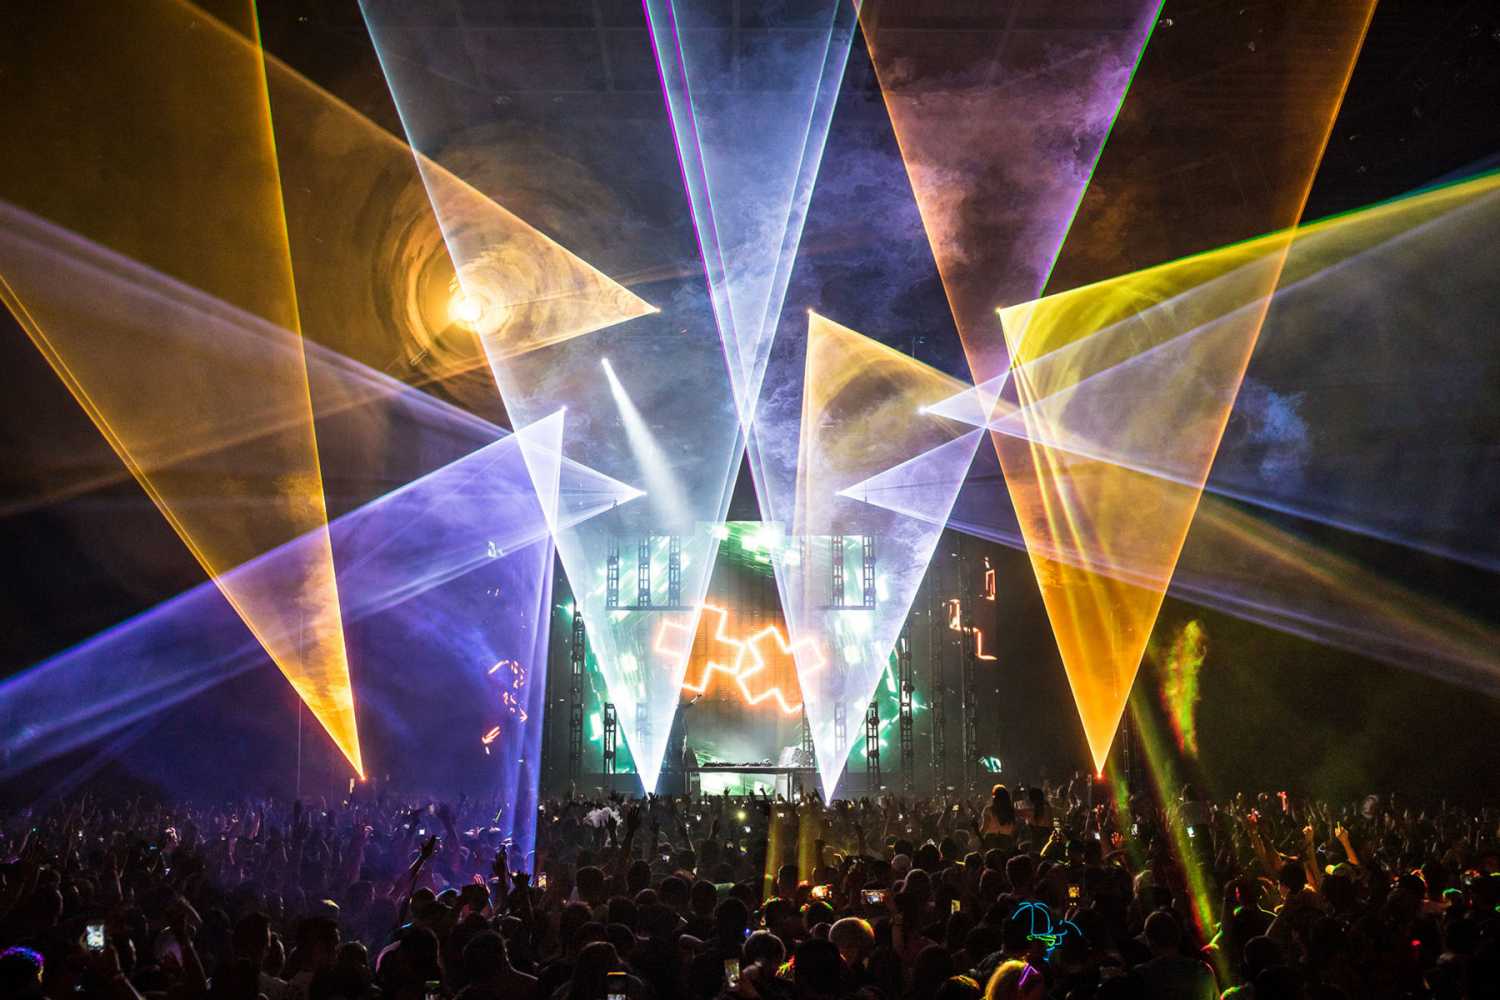 The new Martin Garrix live show which will tour around the world for the rest of the year